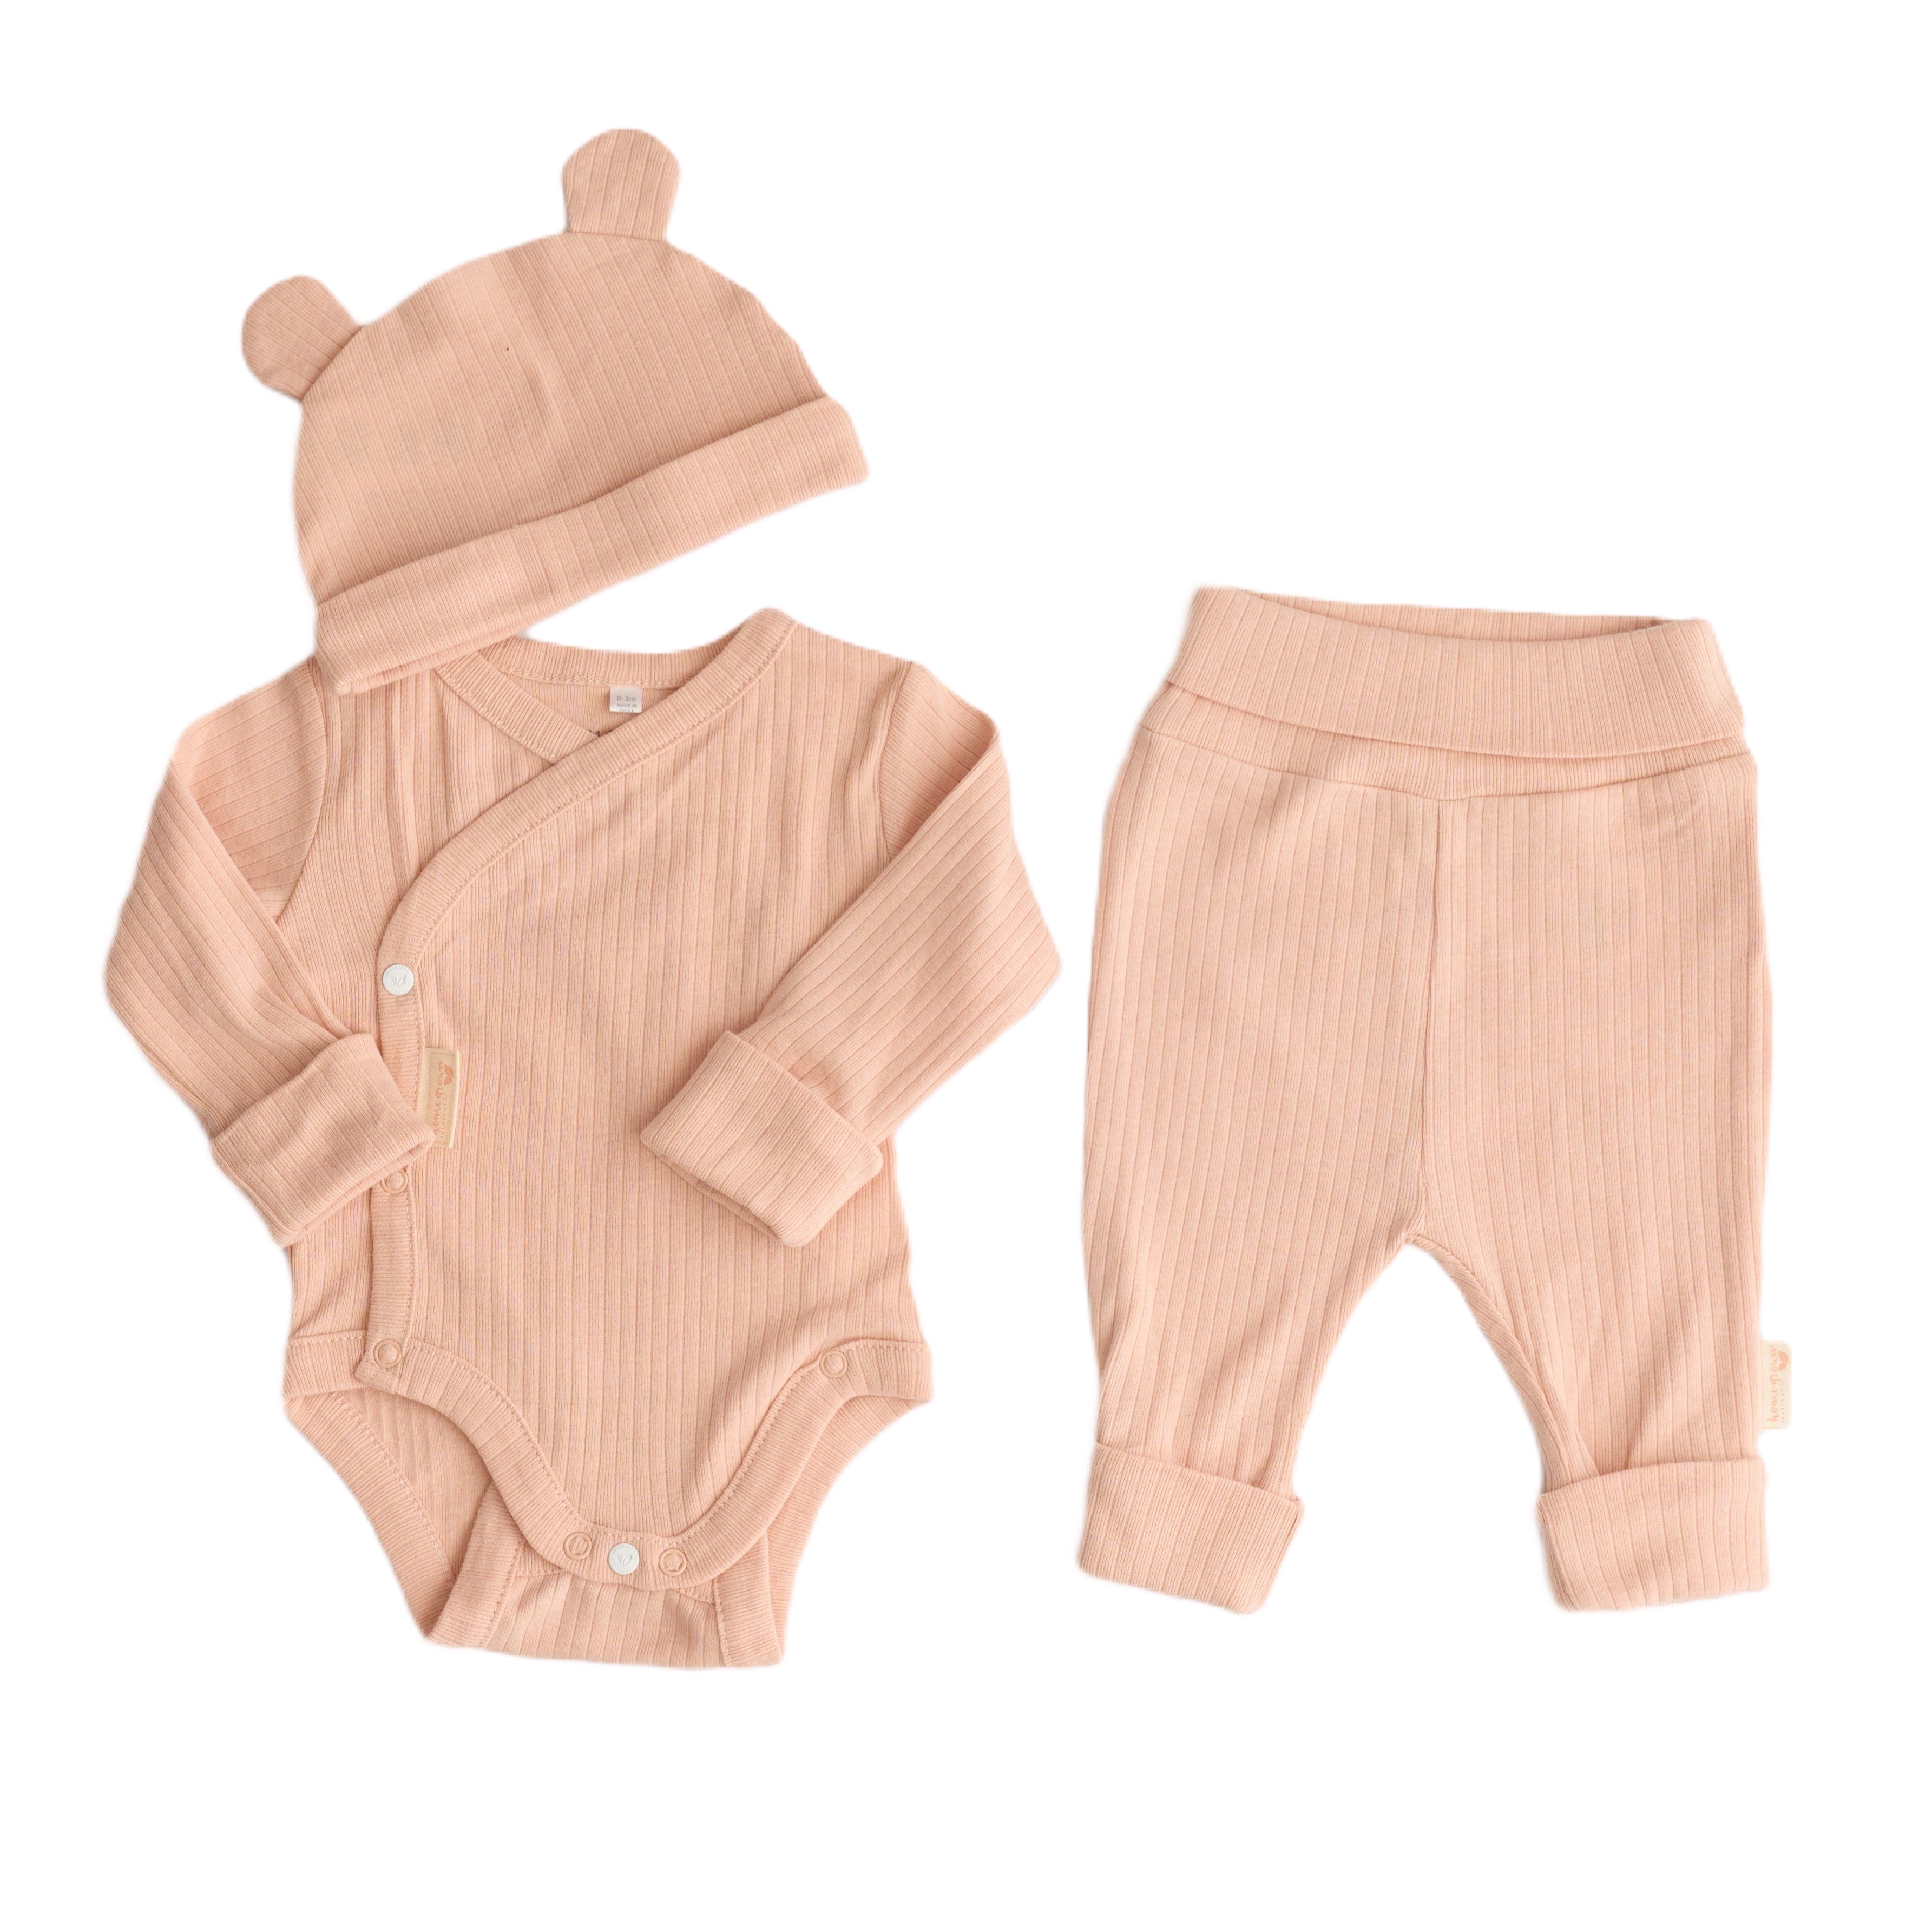 pinky orange baby girls outfit